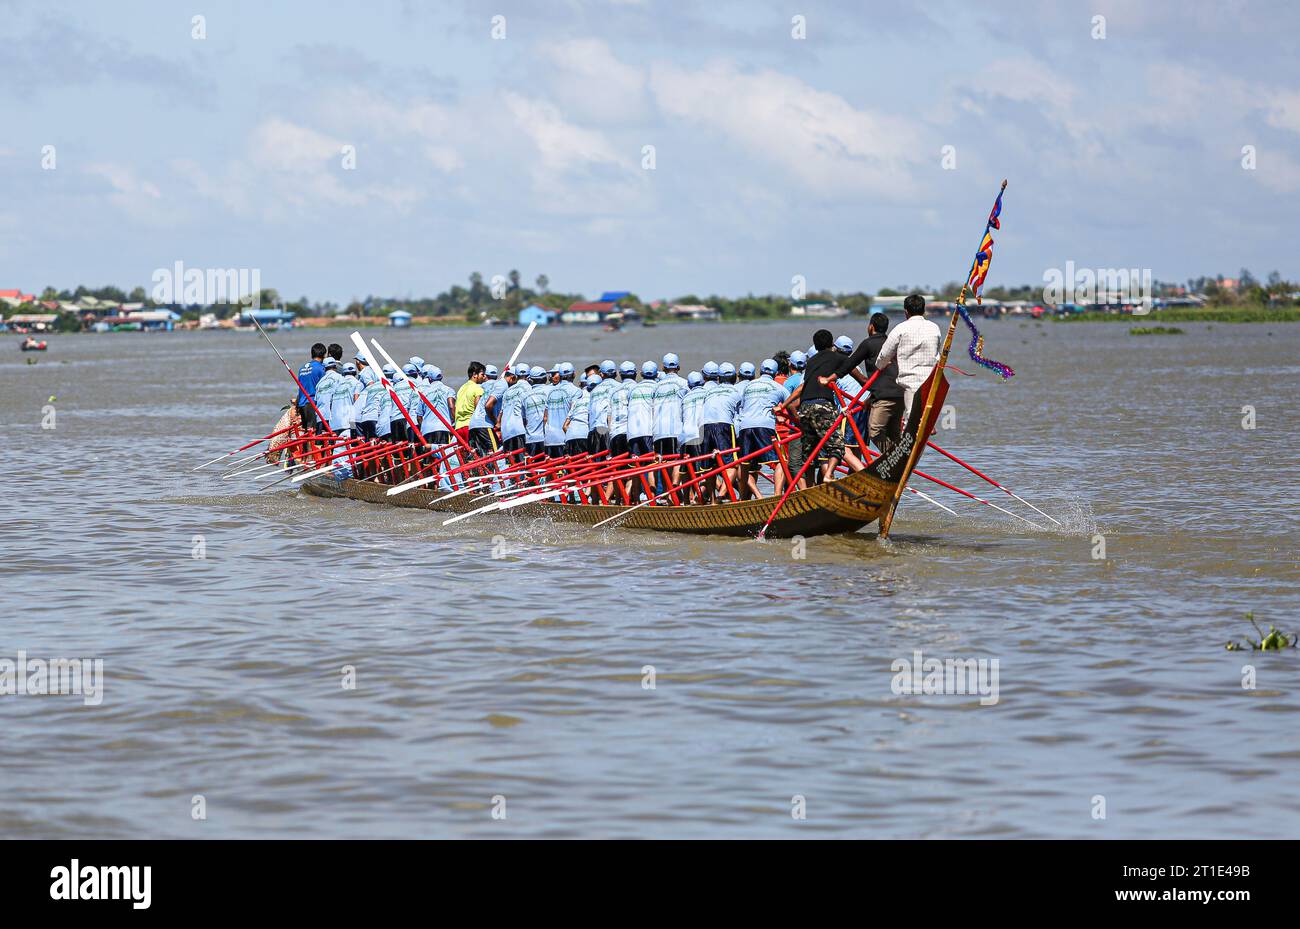 Kampong Chhnang, Cambodia. October 13, 2023 : Racing boat training in preparation for the Bon Om Touk Water Festival races (November 26-28) and Pursat River regatta (November 4-6). Boat crews were urged by officials to train hard as this traditional Khmer celebration return to Phnom Penh after being canceled for three consecutive years. The event honors the occasion of the Tonle Sap River reversing its flow, a unique event that attracts millions people, locals and tourists. Today, Cambodian people start a 3 days public holiday for Pchum Ben Ancestor's Day. Credit: Kevin Izorce/Alamy Live News Stock Photo